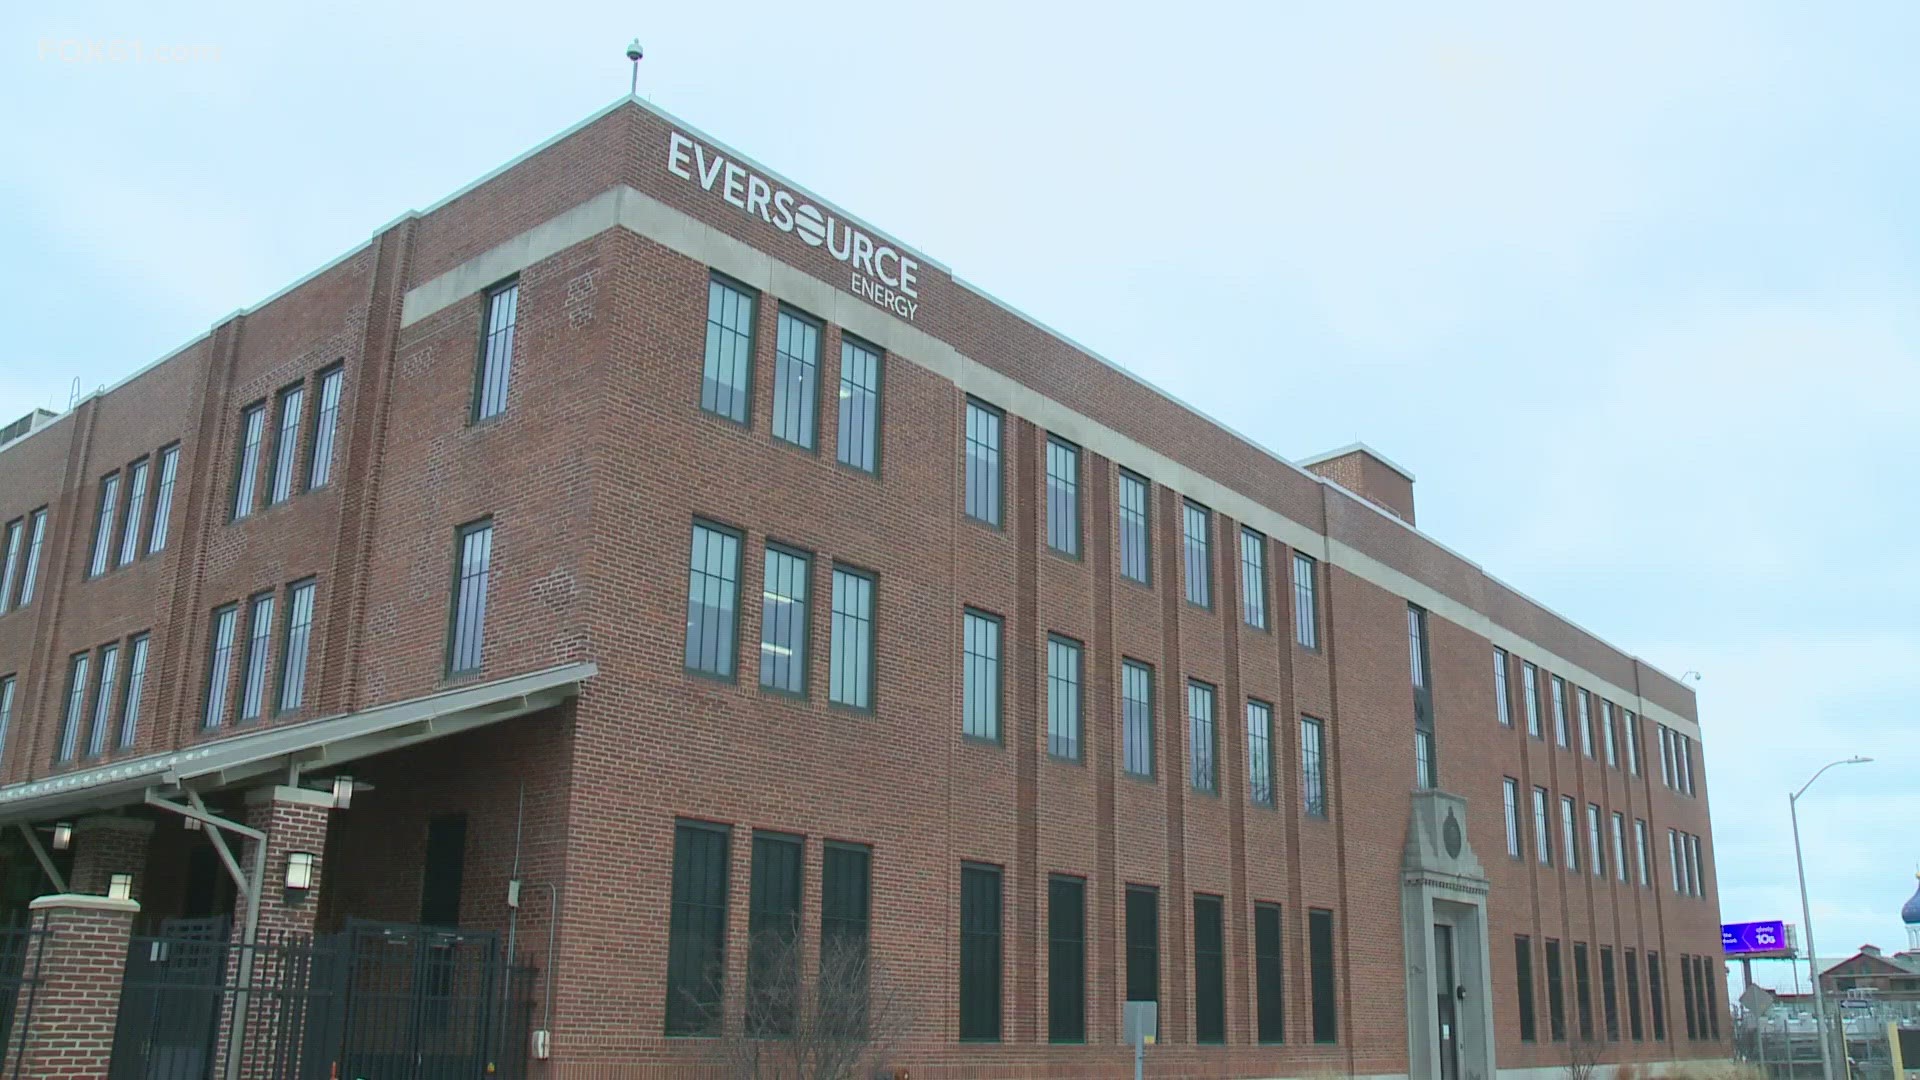 Eversource is anticipating power outages and has prepared.